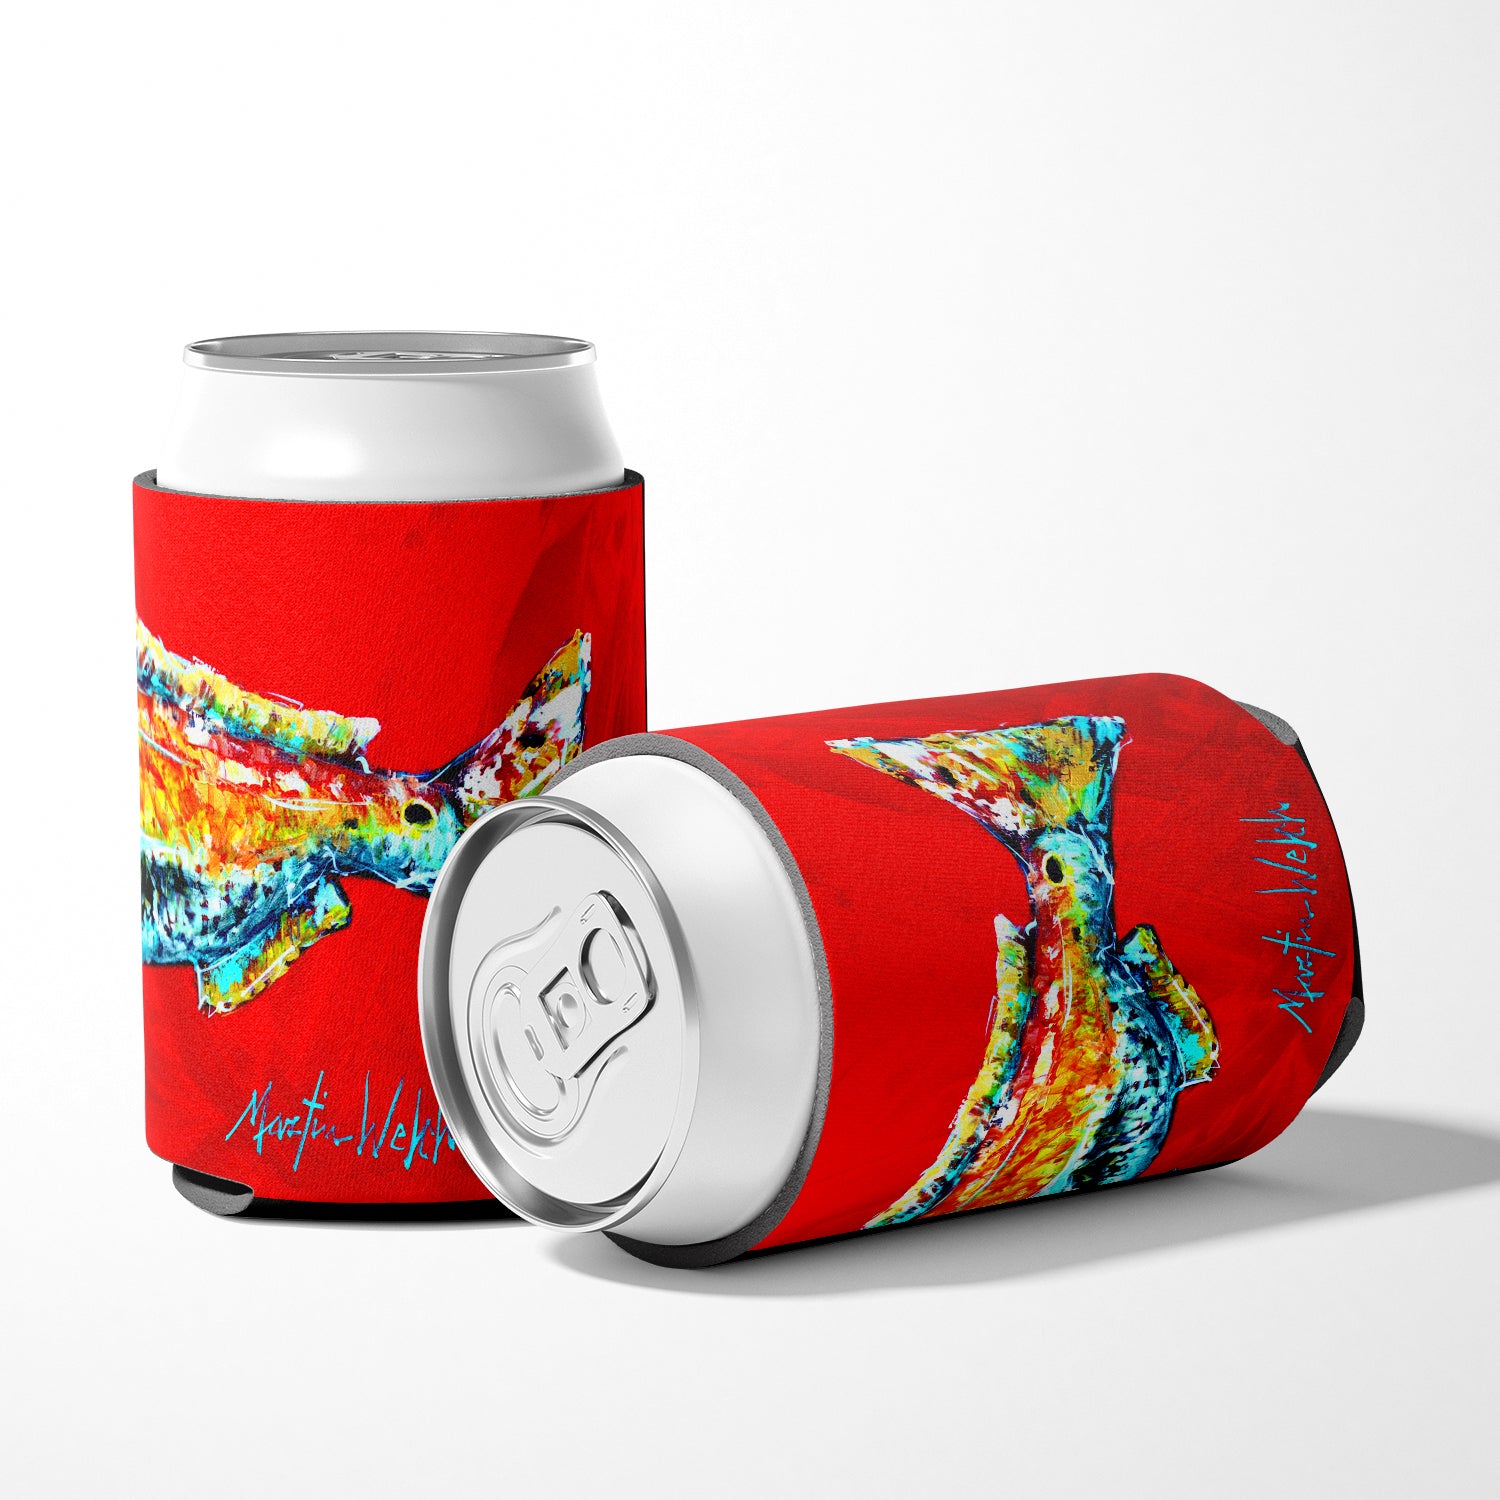 Fish - Red Fish Alphonzo Tail Can or Bottle Beverage Insulator Hugger.